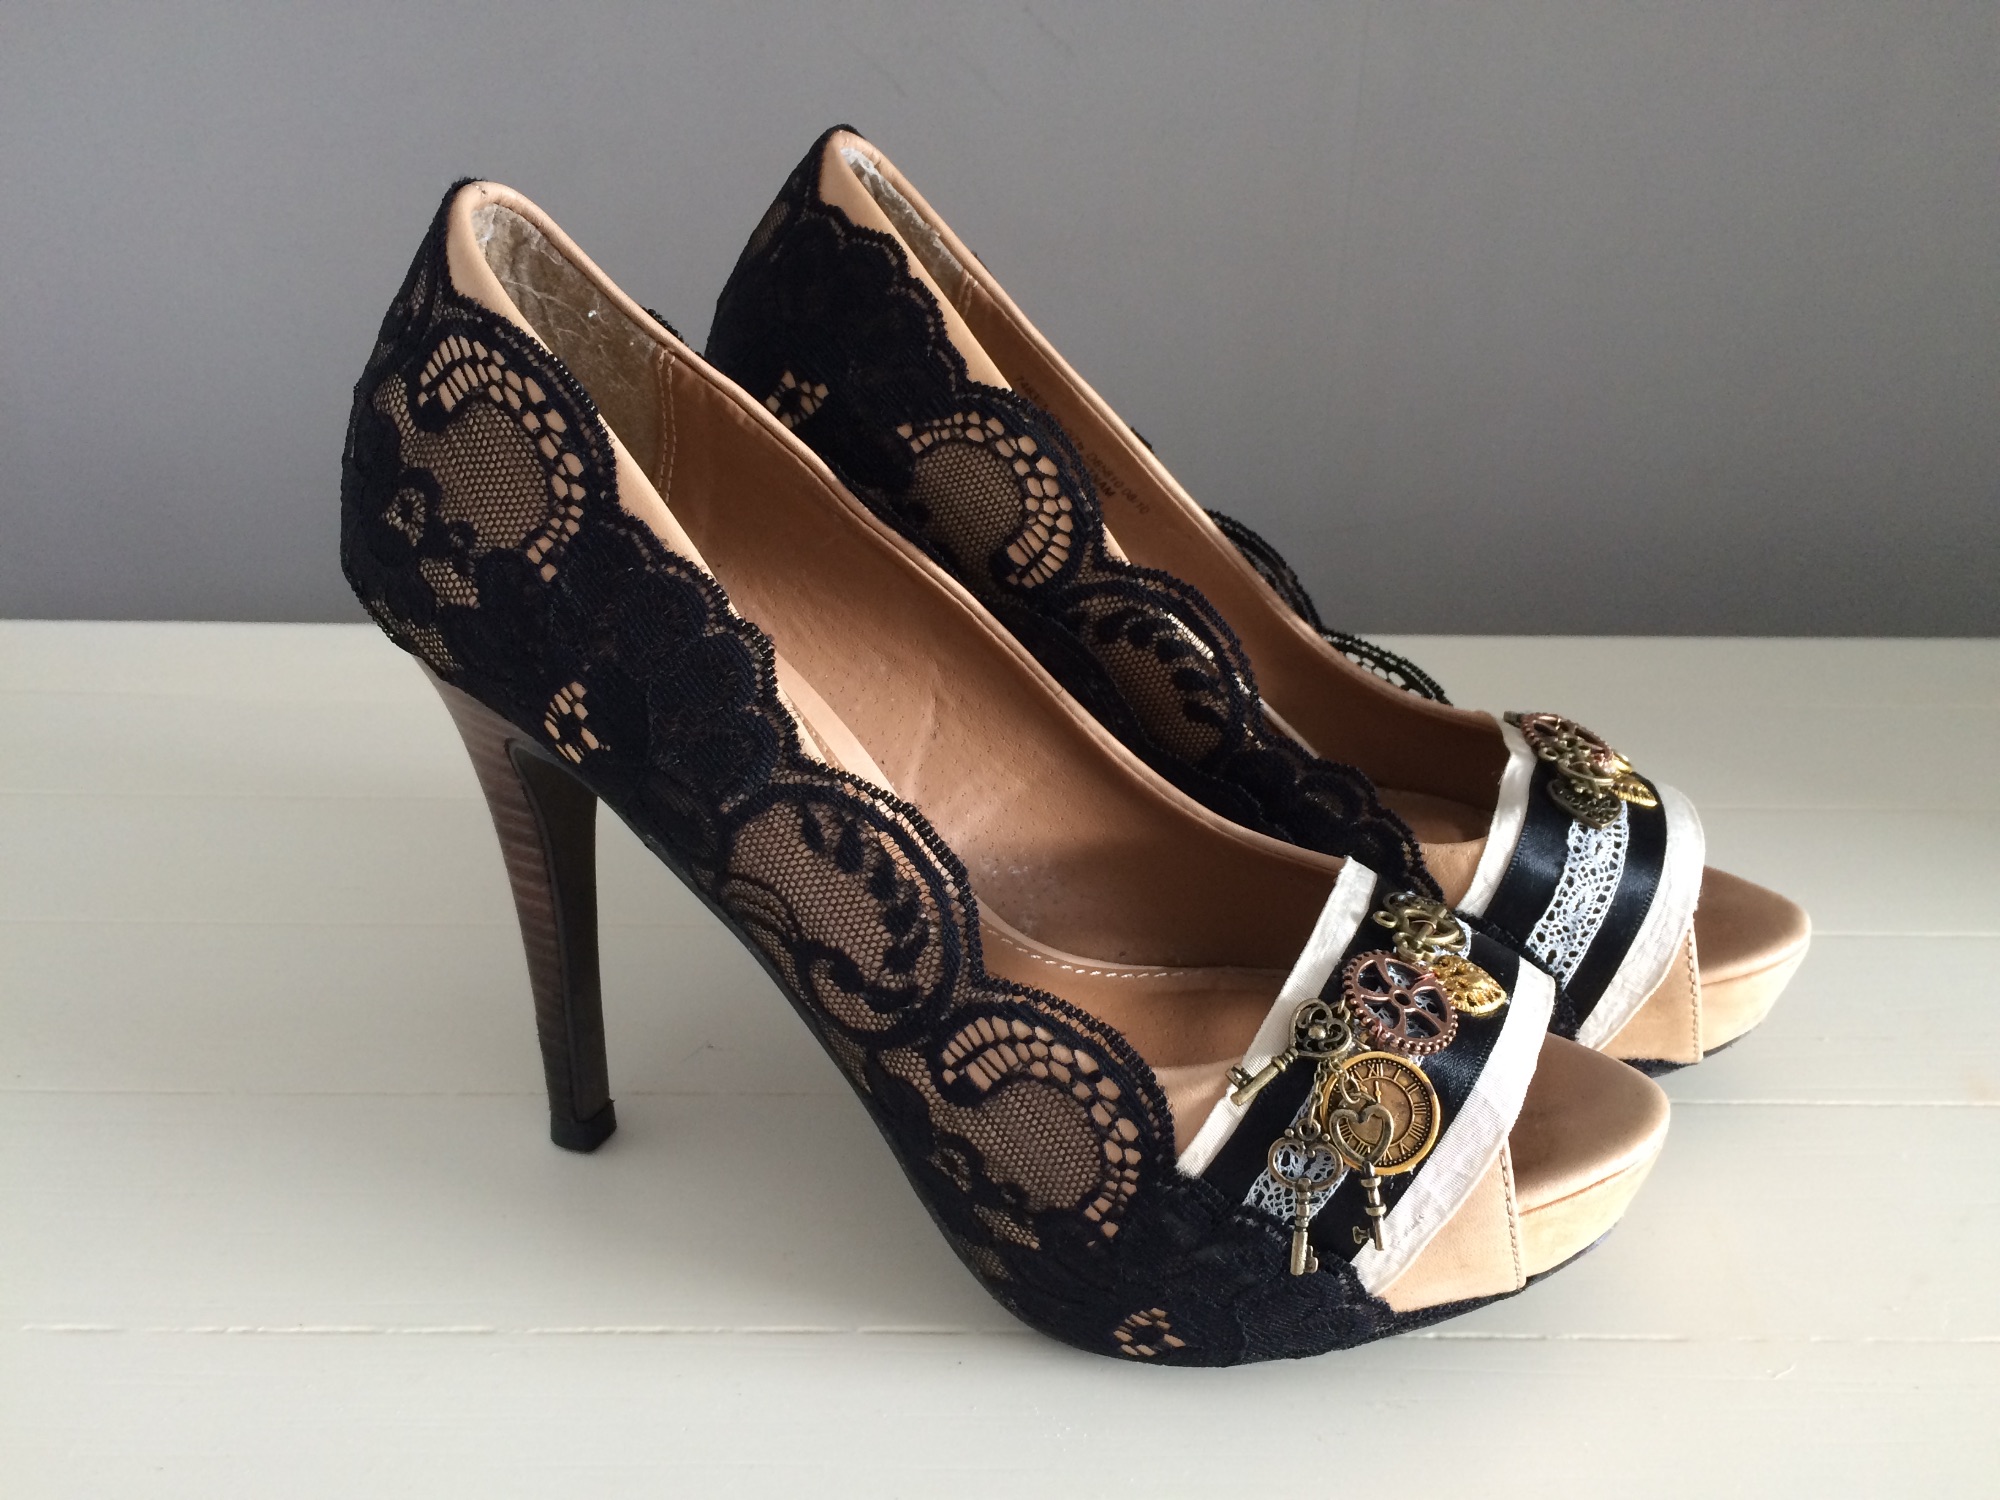 Custom steampunk peep toe shoes by Lace and Love. Black lace with cogs and clock embelishments